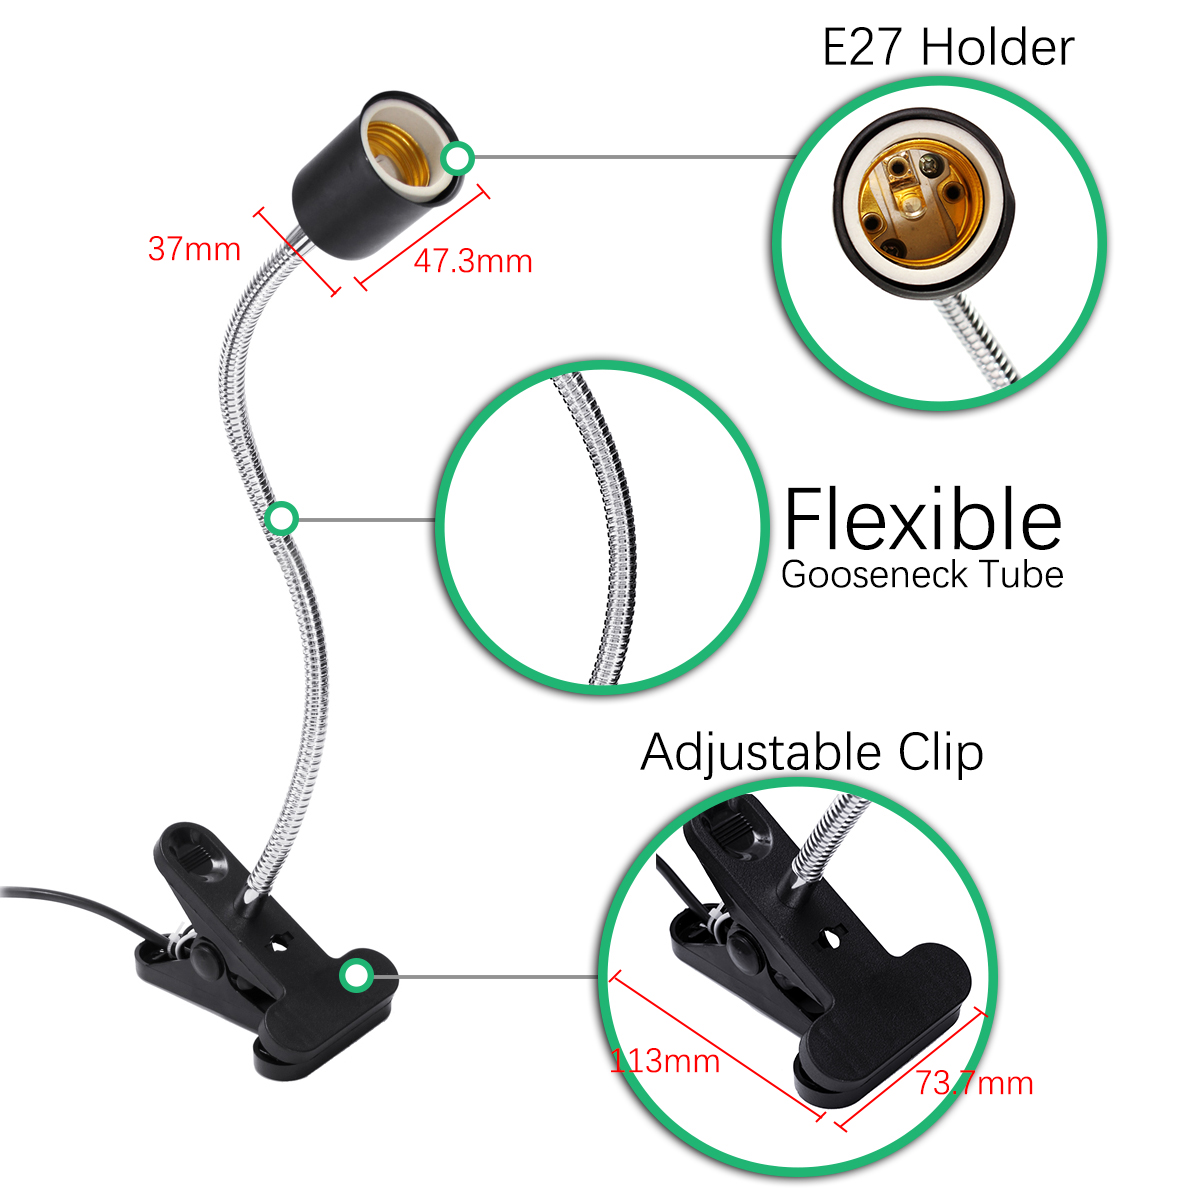 40CM-E27-Flexible-Pet-Reptile-Light-Bulb-Adapter-Lamp-Holder-Socket-with-Clip-ON-OFF-Switch-1309498-9